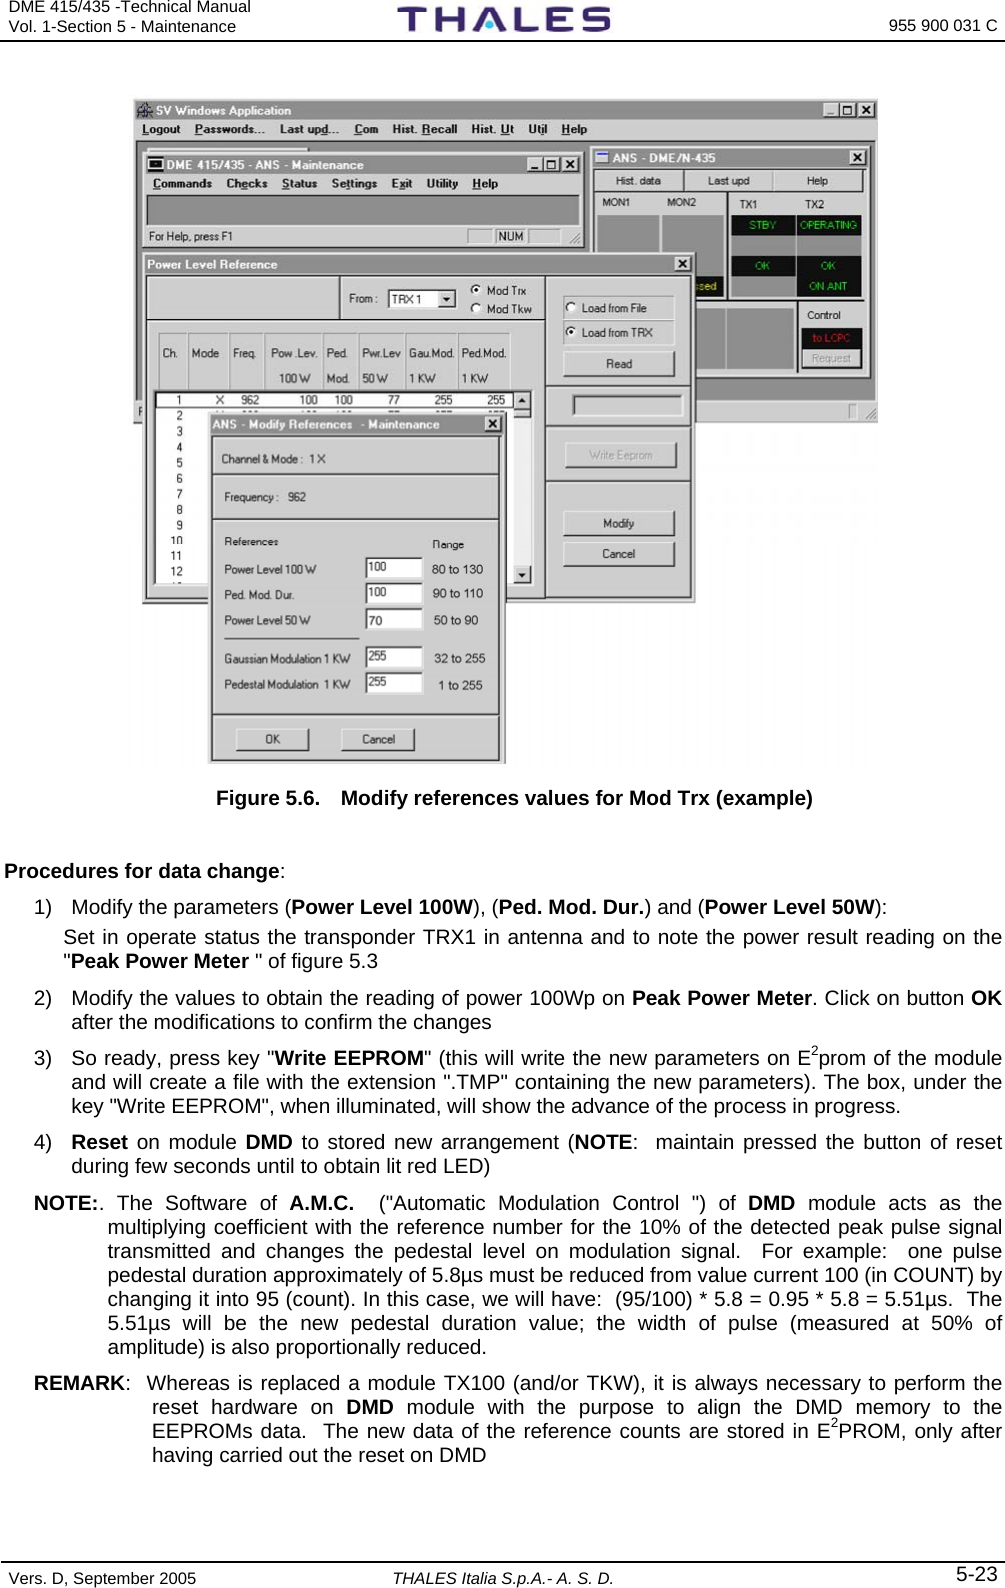 DME 415/435 -Technical Manual Vol. 1-Section 5 - Maintenance    955 900 031 C Vers. D, September 2005  THALES Italia S.p.A.- A. S. D. 5-23      Figure 5.6.  Modify references values for Mod Trx (example)  Procedures for data change: 1)  Modify the parameters (Power Level 100W), (Ped. Mod. Dur.) and (Power Level 50W):  Set in operate status the transponder TRX1 in antenna and to note the power result reading on the &quot;Peak Power Meter &quot; of figure 5.3 2)  Modify the values to obtain the reading of power 100Wp on Peak Power Meter. Click on button OK after the modifications to confirm the changes 3)  So ready, press key &quot;Write EEPROM&quot; (this will write the new parameters on E2prom of the module and will create a file with the extension &quot;.TMP&quot; containing the new parameters). The box, under the key &quot;Write EEPROM&quot;, when illuminated, will show the advance of the process in progress. 4)  Reset on module DMD to stored new arrangement (NOTE:  maintain pressed the button of reset during few seconds until to obtain lit red LED) NOTE:. The Software of A.M.C.  (&quot;Automatic Modulation Control &quot;) of DMD module acts as the multiplying coefficient with the reference number for the 10% of the detected peak pulse signal transmitted and changes the pedestal level on modulation signal.  For example:  one pulse pedestal duration approximately of 5.8µs must be reduced from value current 100 (in COUNT) by changing it into 95 (count). In this case, we will have:  (95/100) * 5.8 = 0.95 * 5.8 = 5.51µs.  The 5.51µs will be the new pedestal duration value; the width of pulse (measured at 50% of amplitude) is also proportionally reduced. REMARK:  Whereas is replaced a module TX100 (and/or TKW), it is always necessary to perform the reset hardware on DMD  module with the purpose to align the DMD memory to the EEPROMs data.  The new data of the reference counts are stored in E2PROM, only after having carried out the reset on DMD  